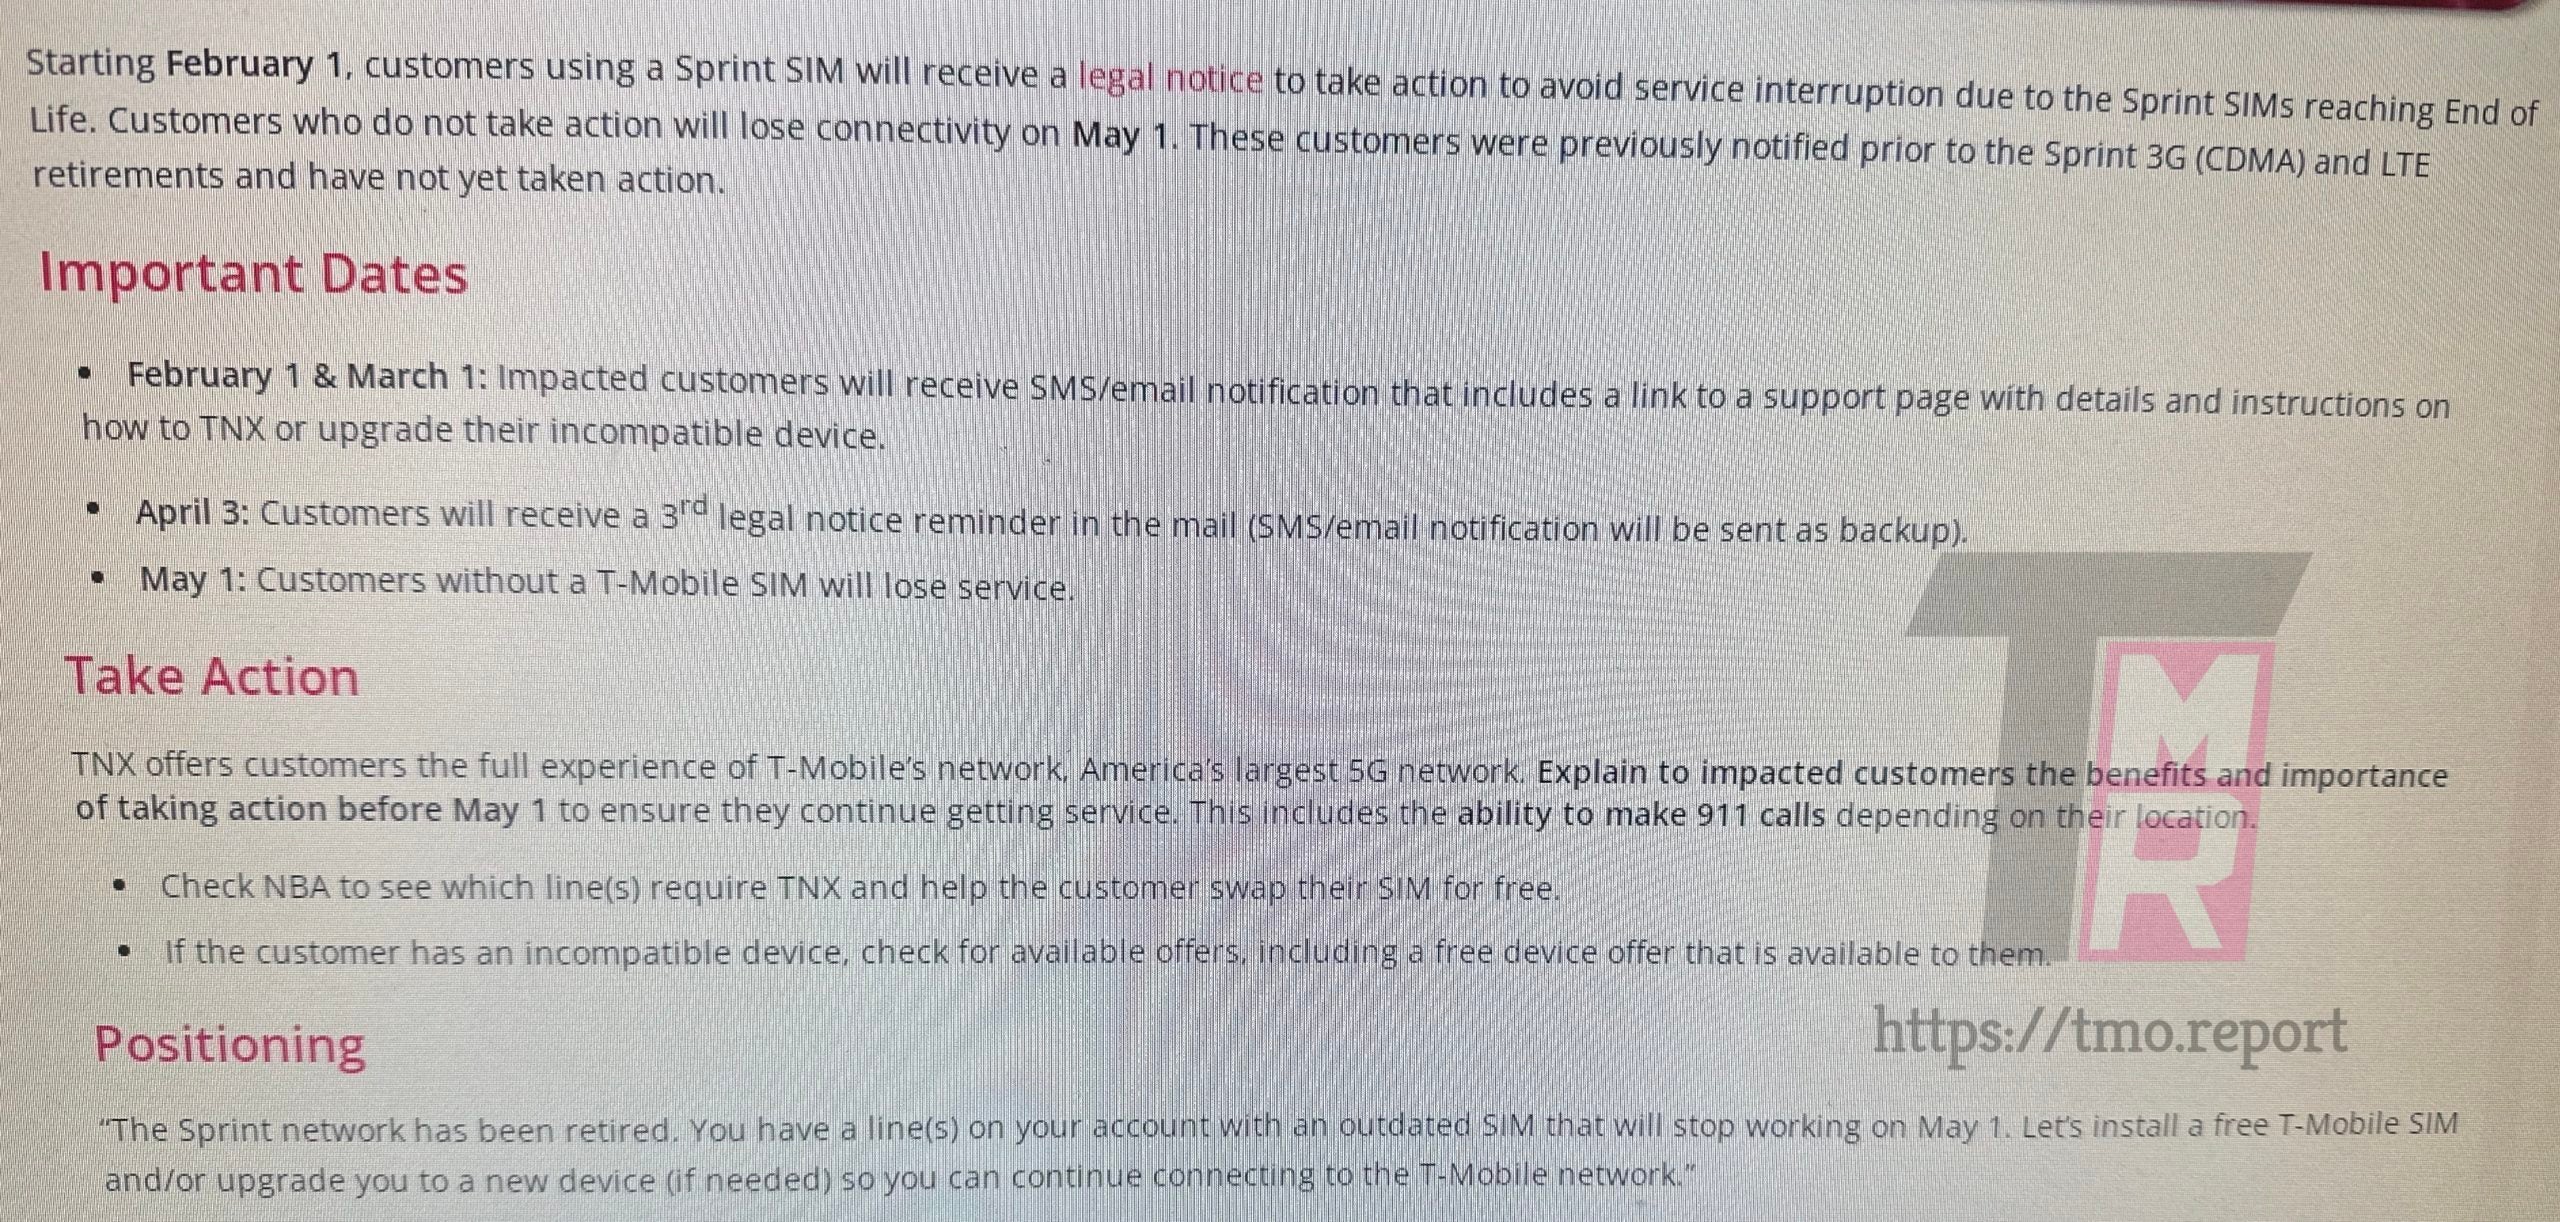 Source - The T-Mo Report - T-Mobile is reminding holdout Sprint customers to switch to a T-Mobile SIM card by May 1st or else